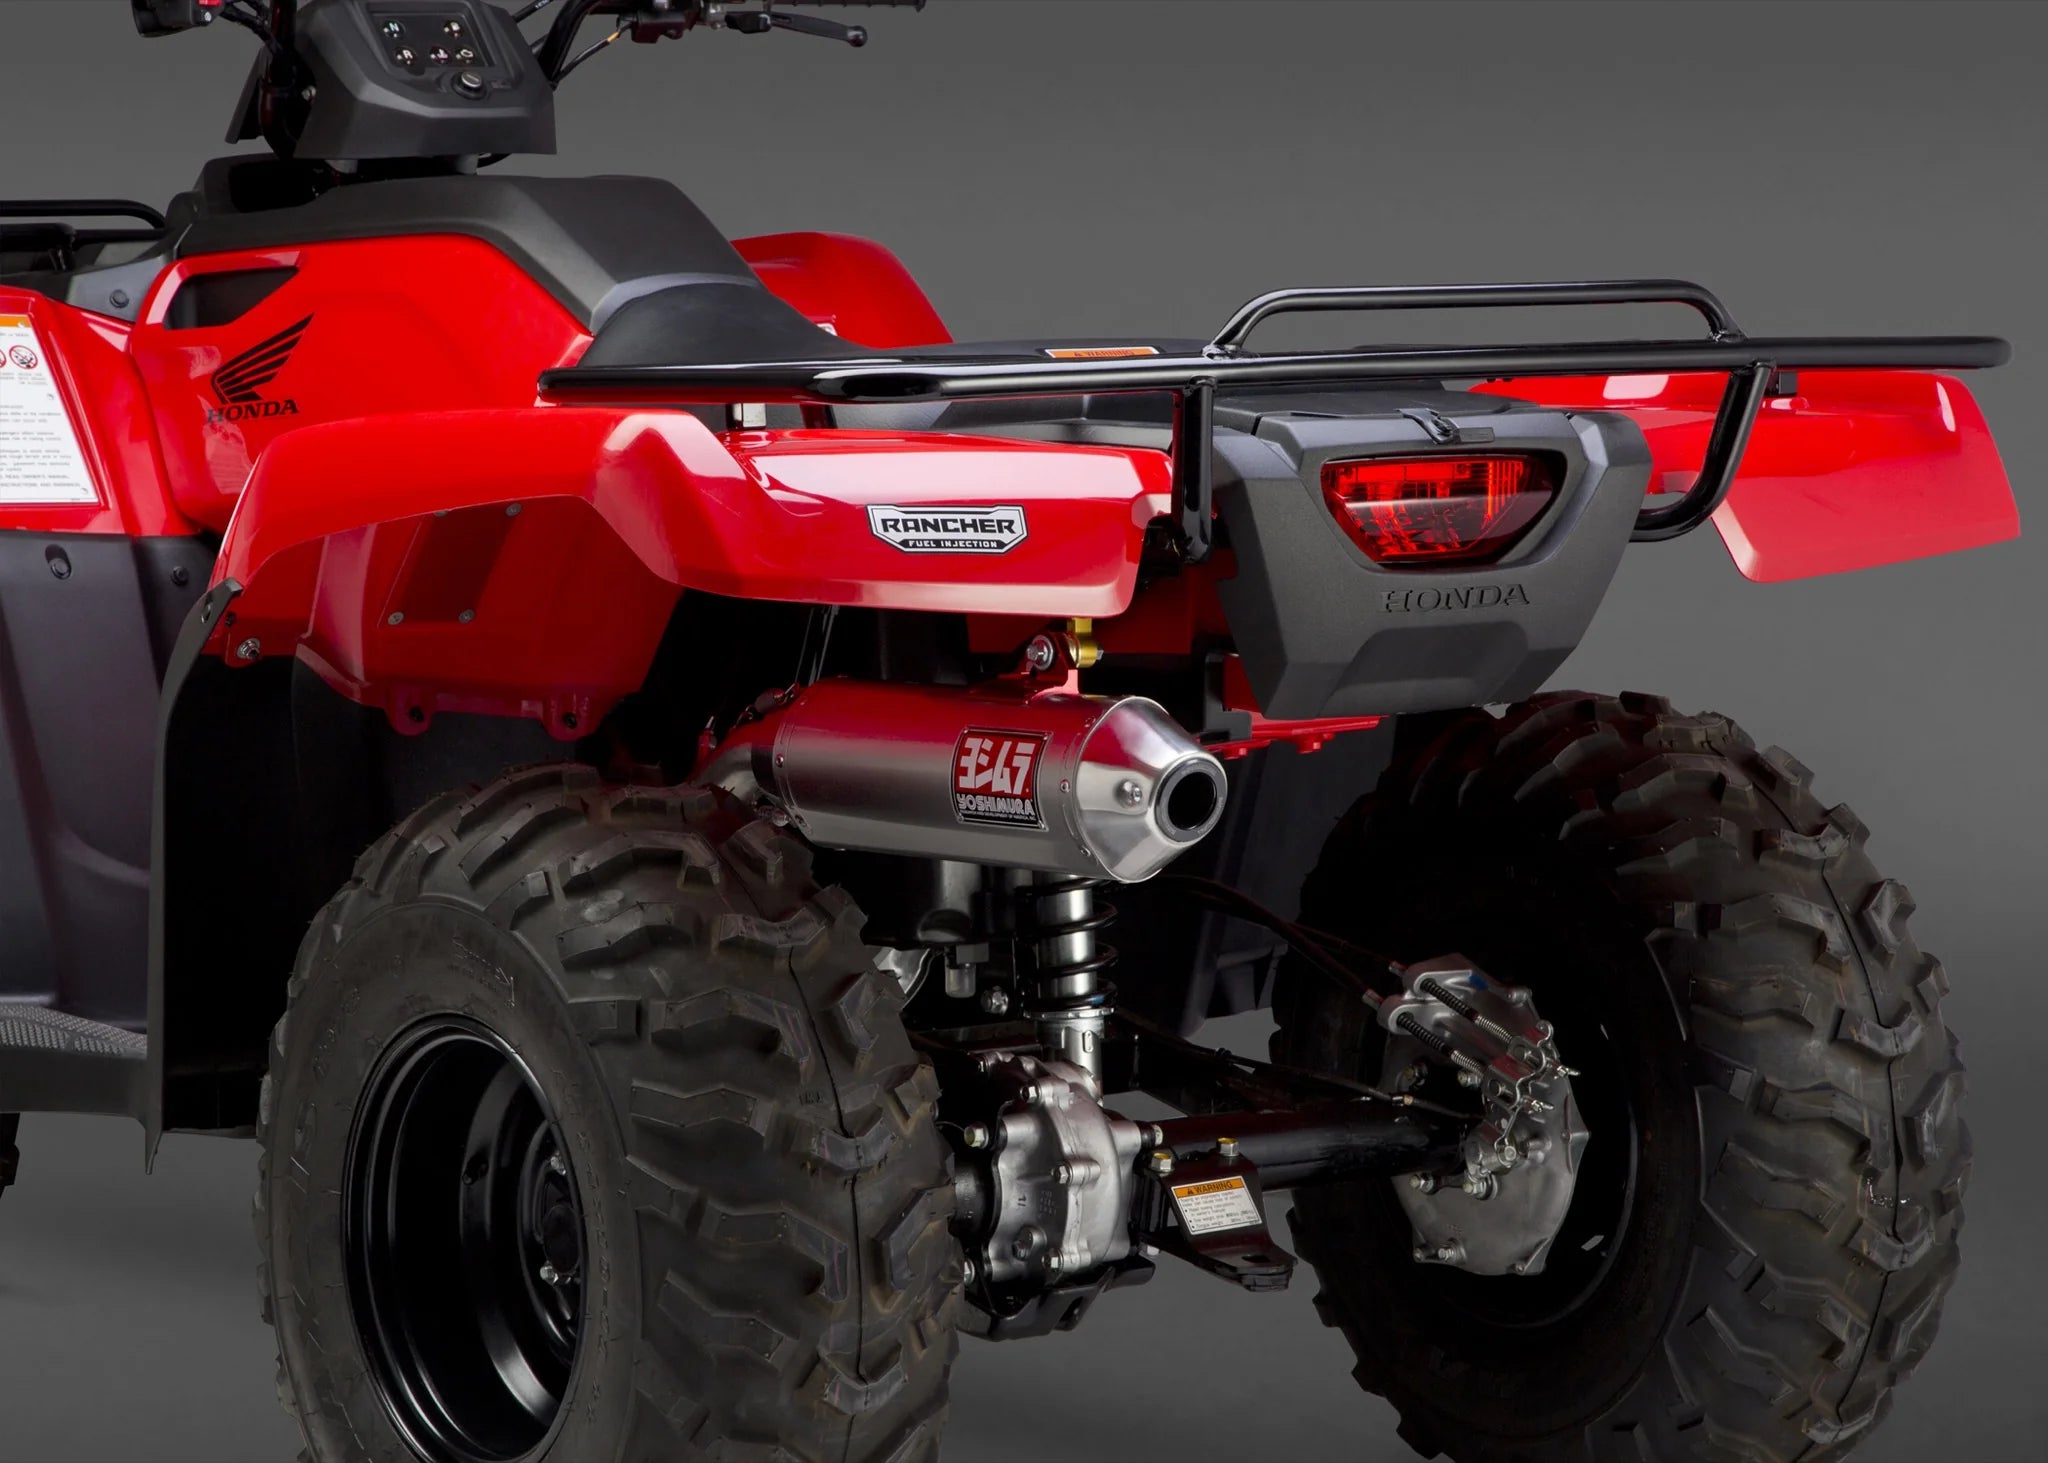 Yoshimura TRX420/500 14-16 RS-2 STAINLESS FULL EXHAUST, WITH STAINLESS MUFFLER 324200C550